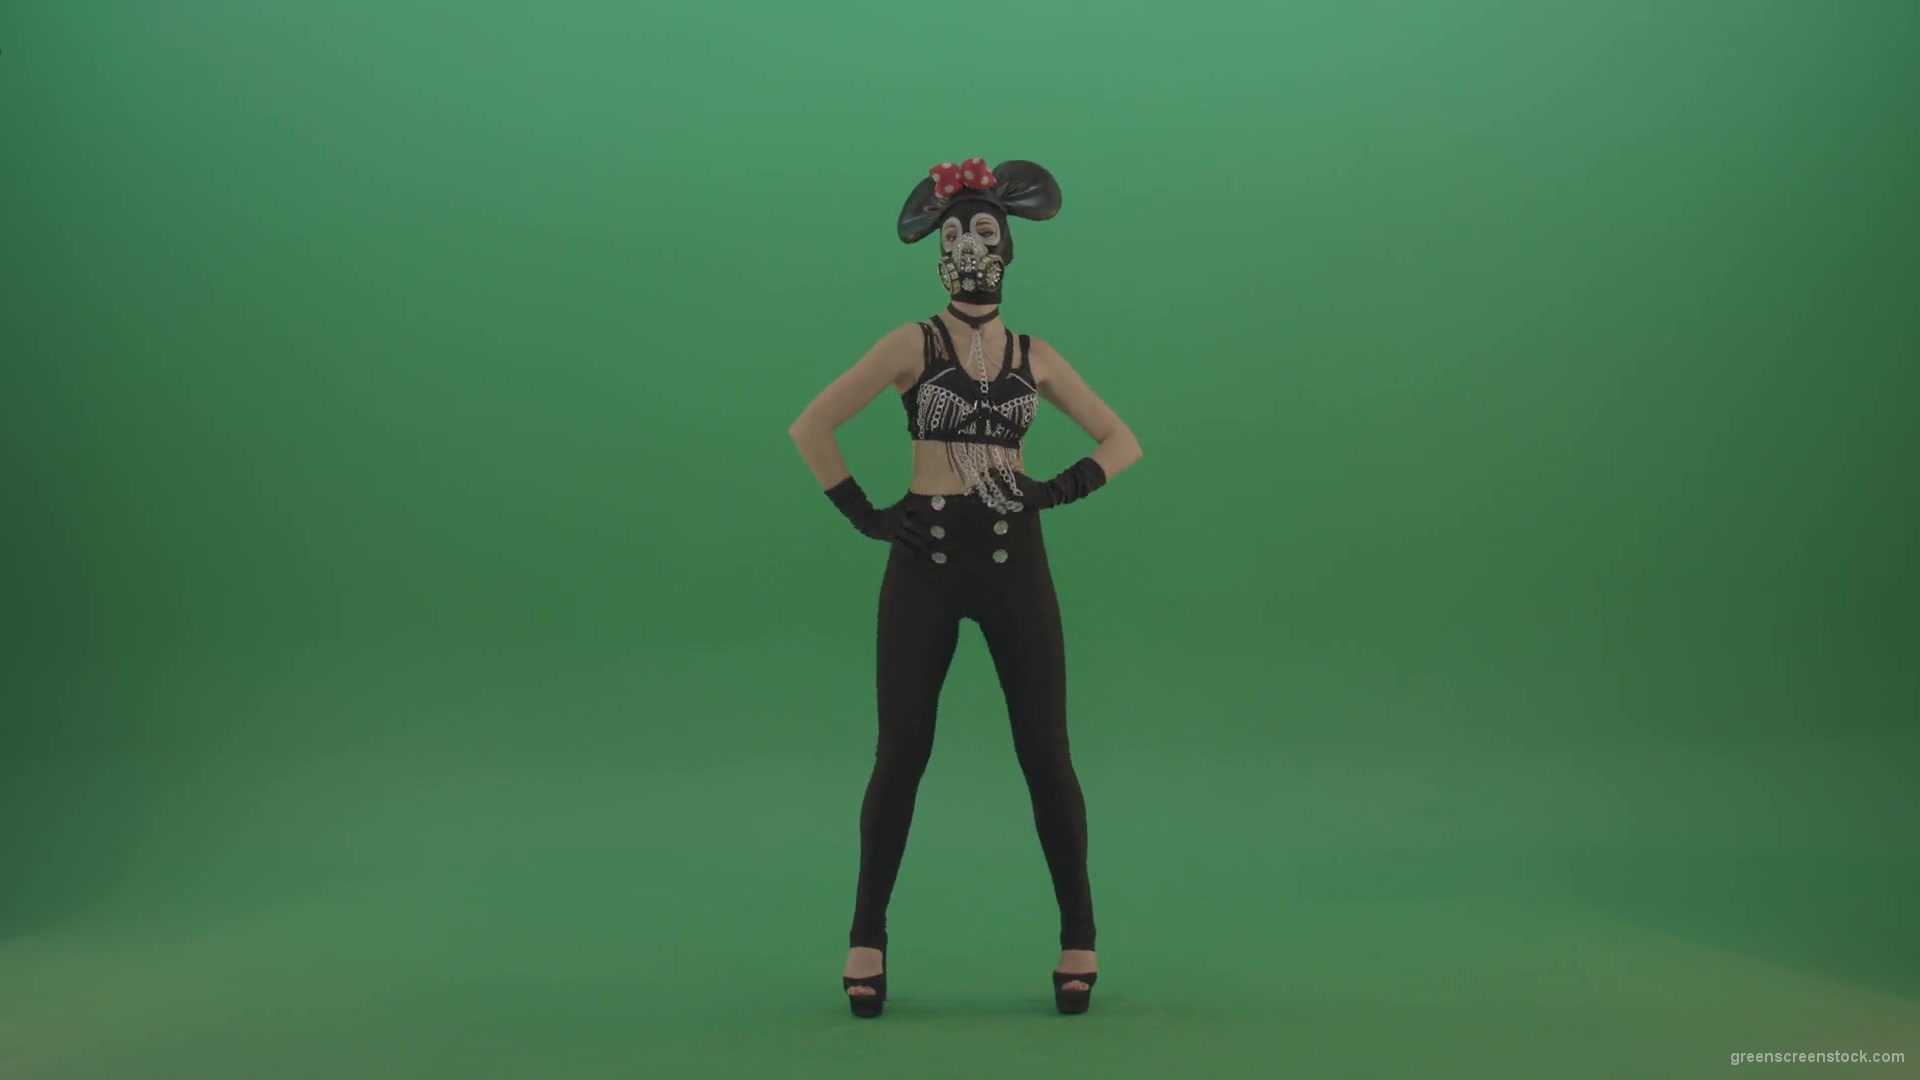 Full-size-strip-girl-in-mouse-costume-and-mask-shaking-ass-and-dancing-on-green-screen-1920_005 Green Screen Stock